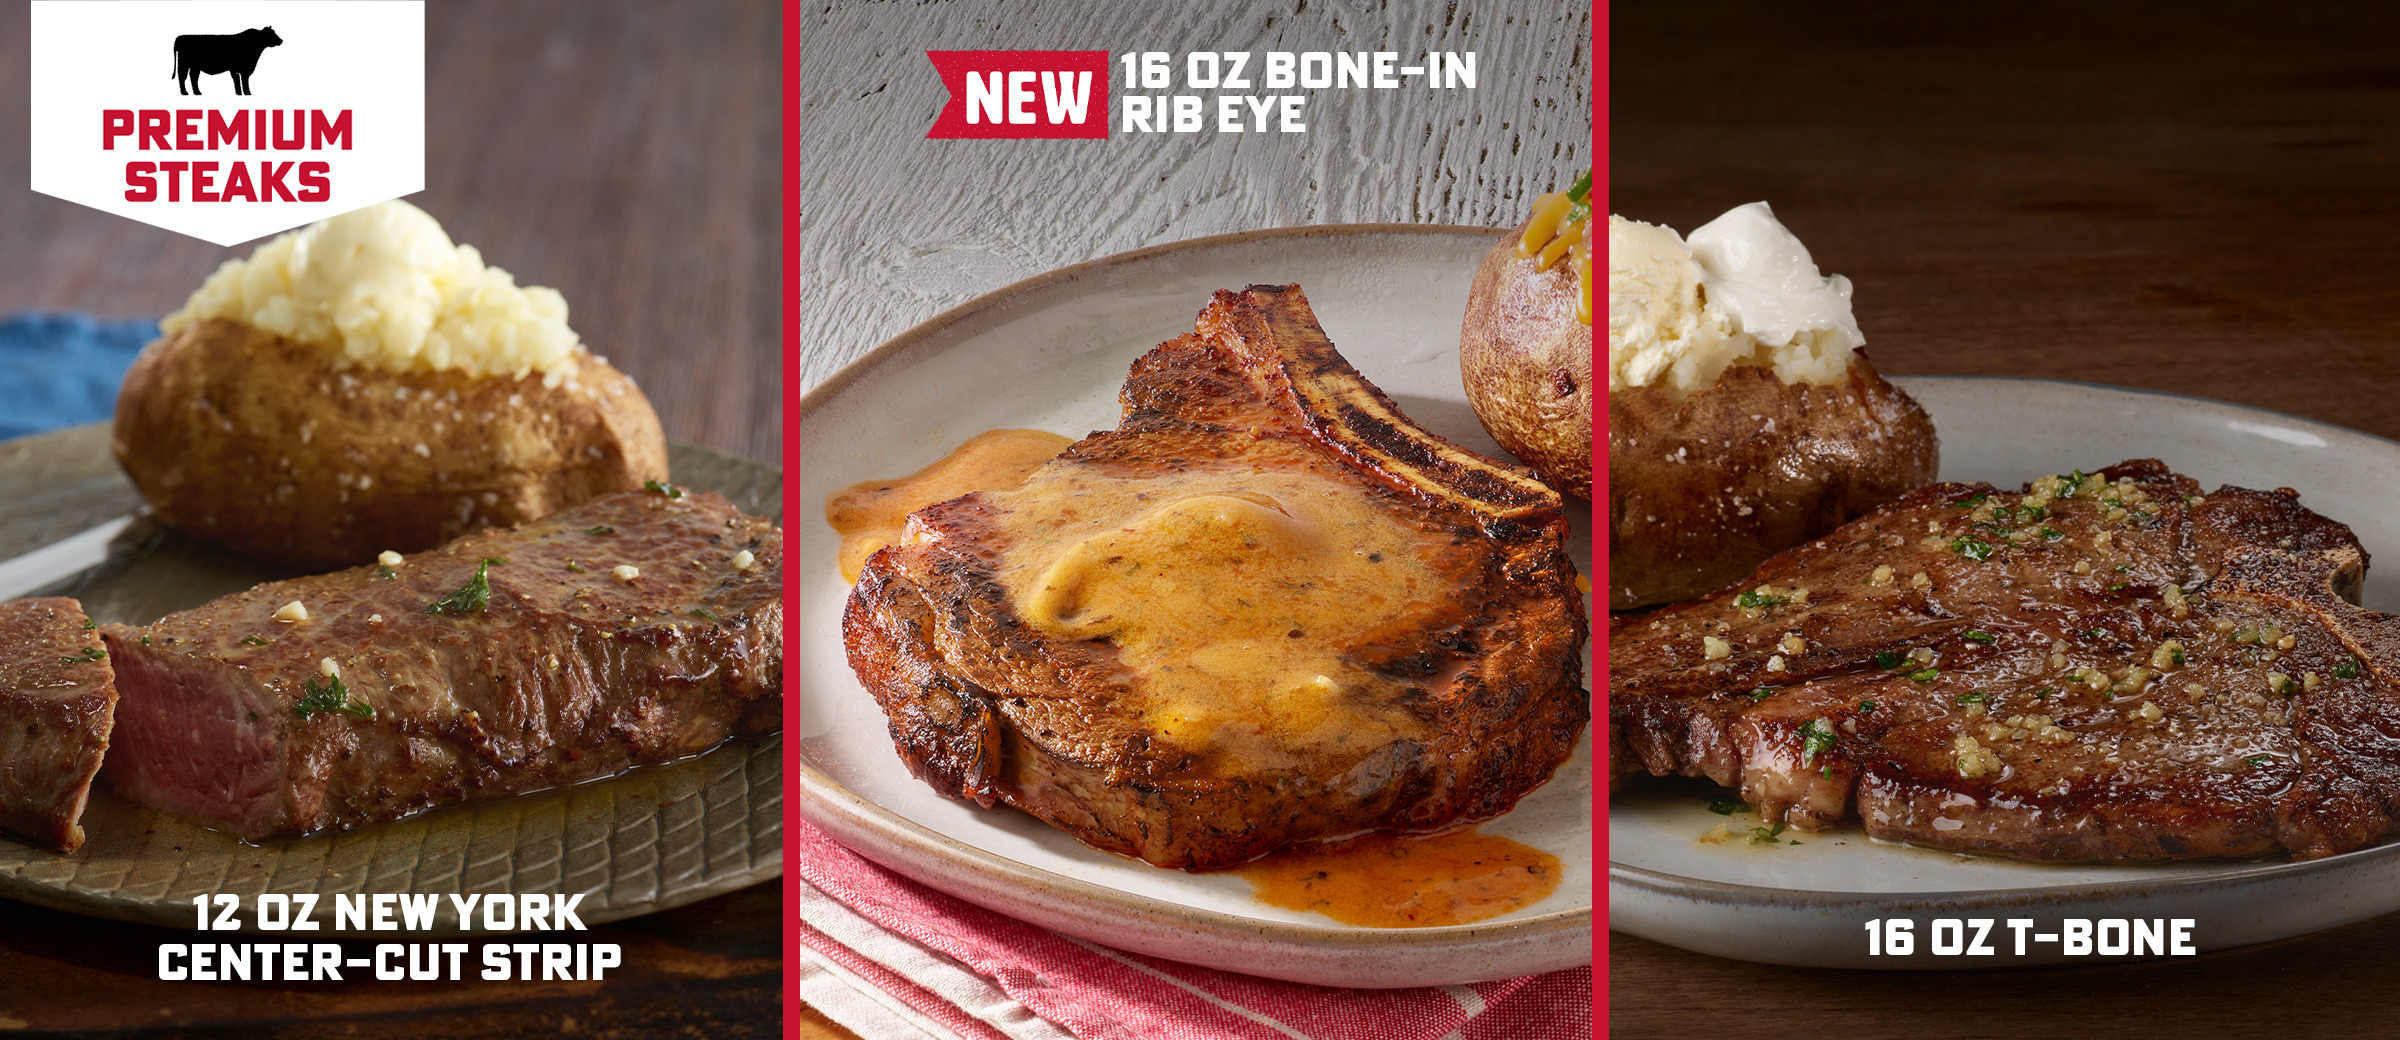 premium steaks & bbq at Ruby Tuesday